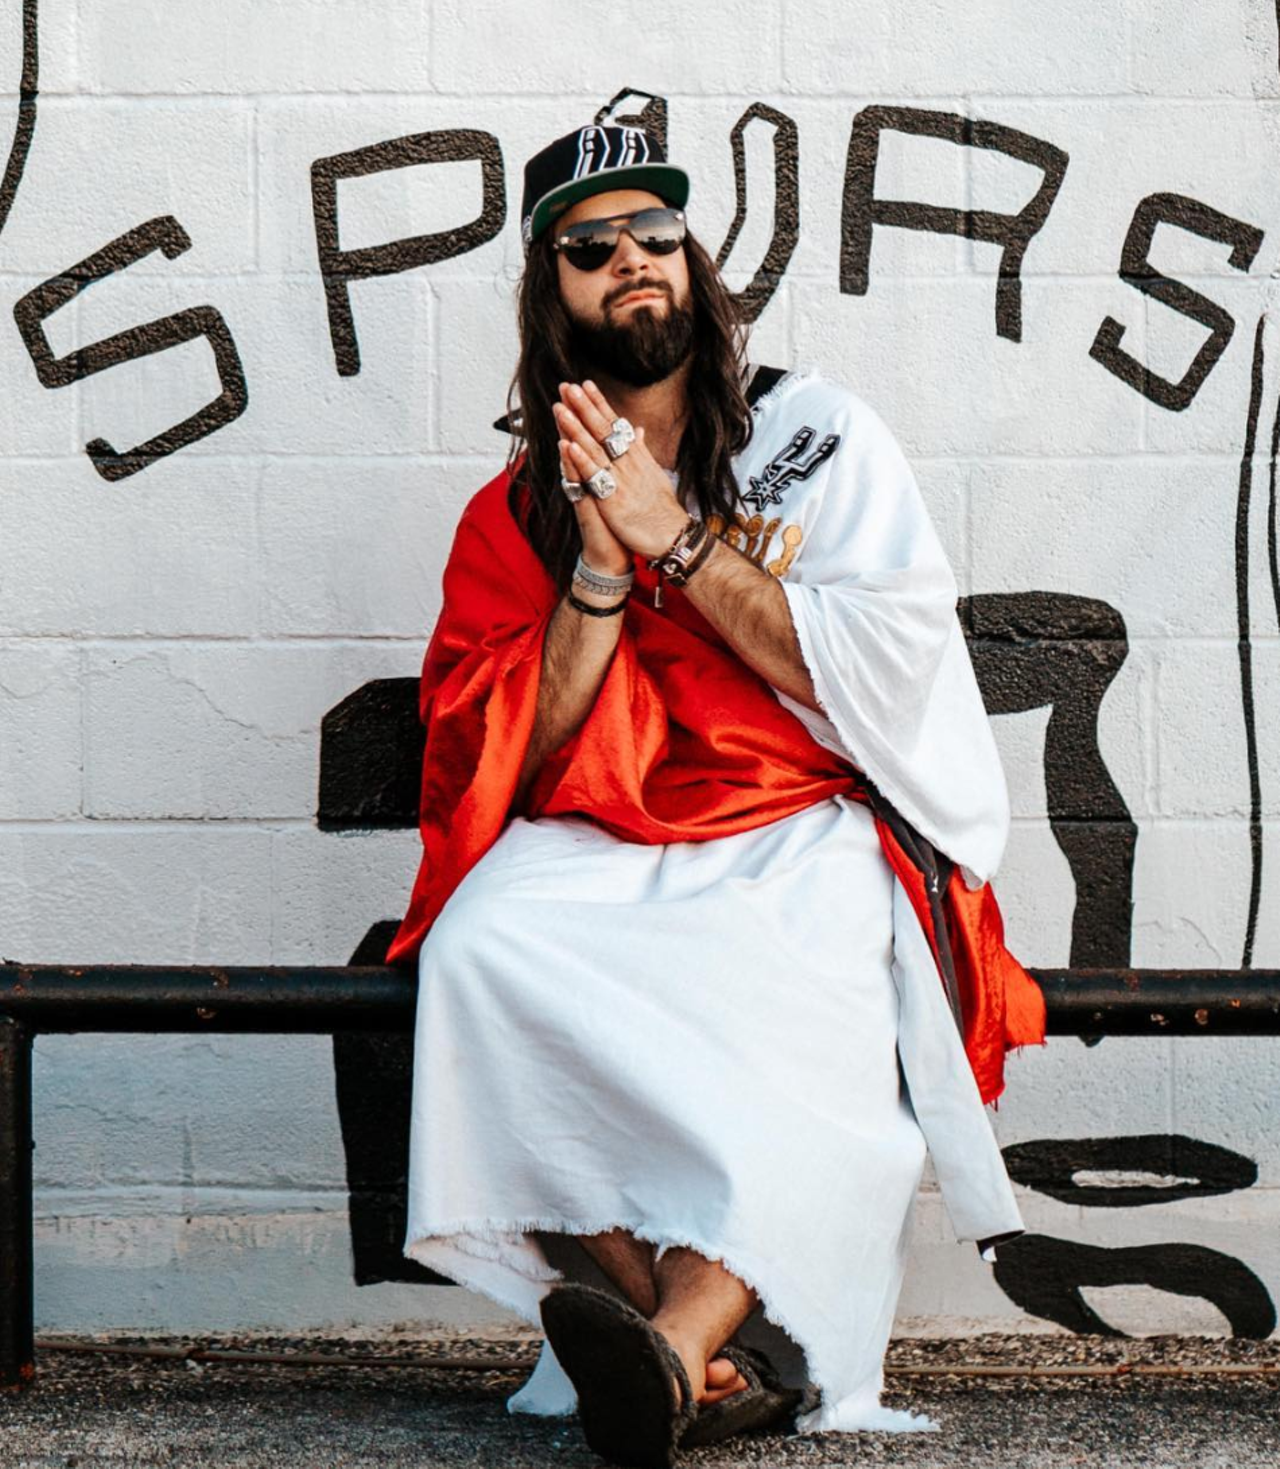 Spurs Jesus
Though he made a fuss asking for attention from the San Antonio Spurs at the beginning of 2020, Spurs Jesus — his real name is Cordero Maldonado — remains a name only recognized in the Alamo City. What reportedly started out as a Halloween costume eventually turned into a local personality that morphed into a clout-seeking “celebrity” that has a not-so-clean record from his business ventures. But, at least you know his name, right?
Photo via Instagram / spursjesus